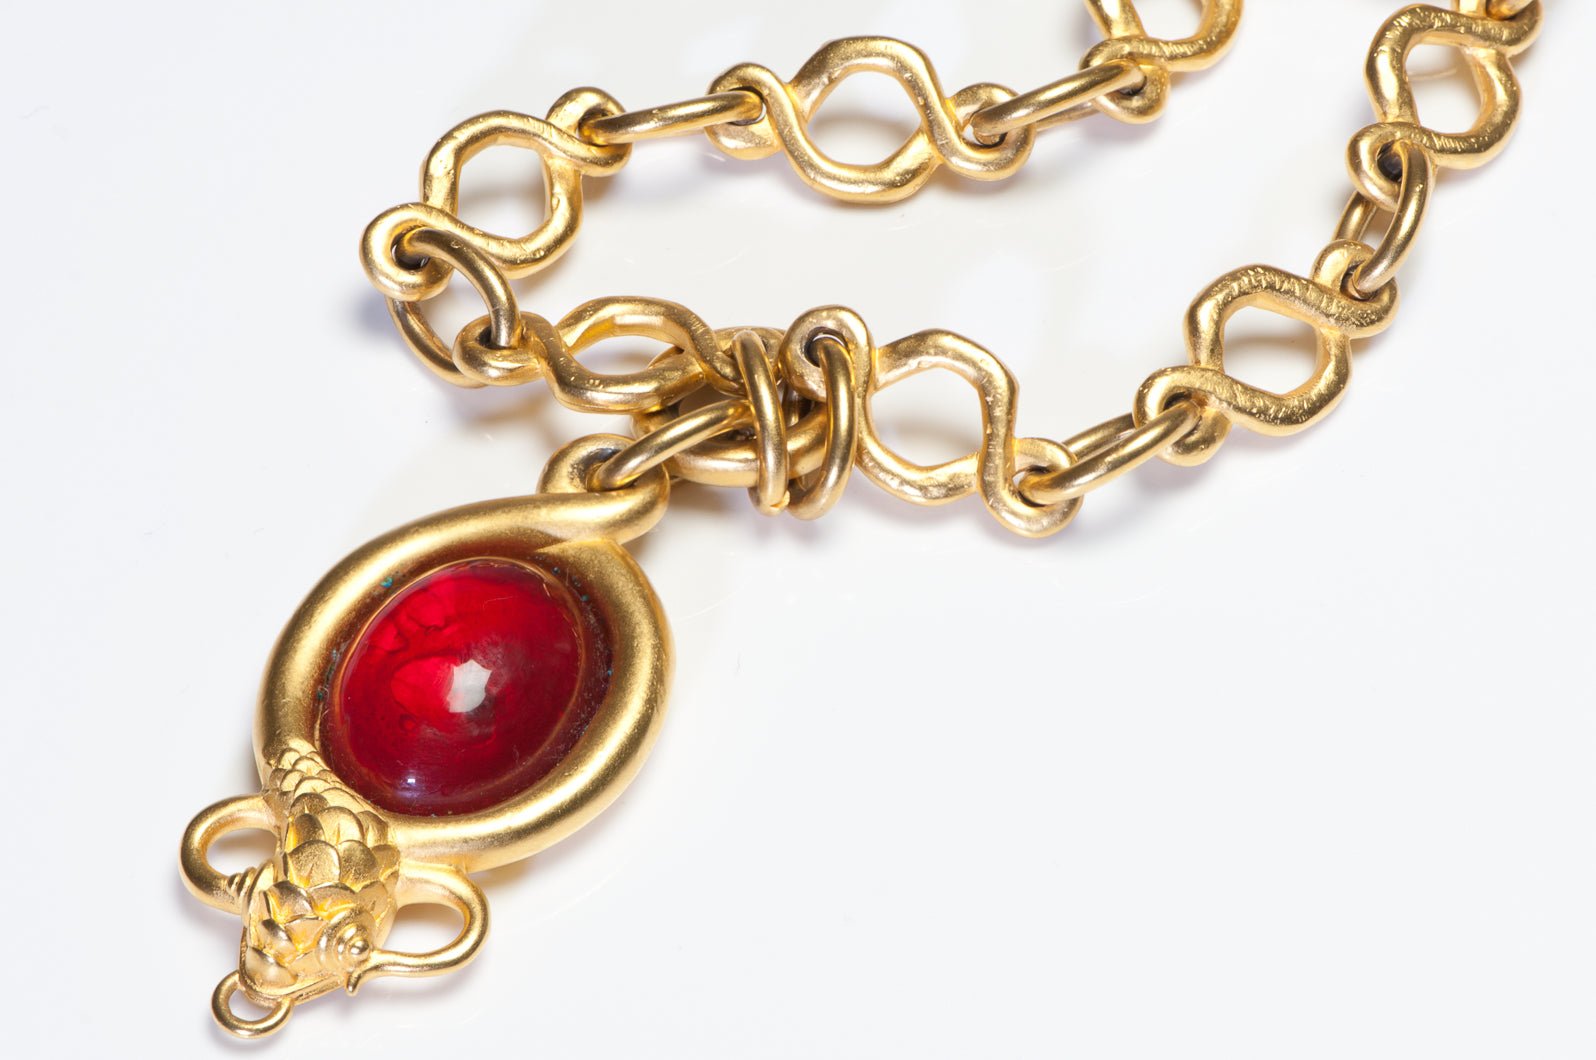 Karl Lagerfeld Paris Gold Plated Red Cabochon Glass Snake Chain Necklace